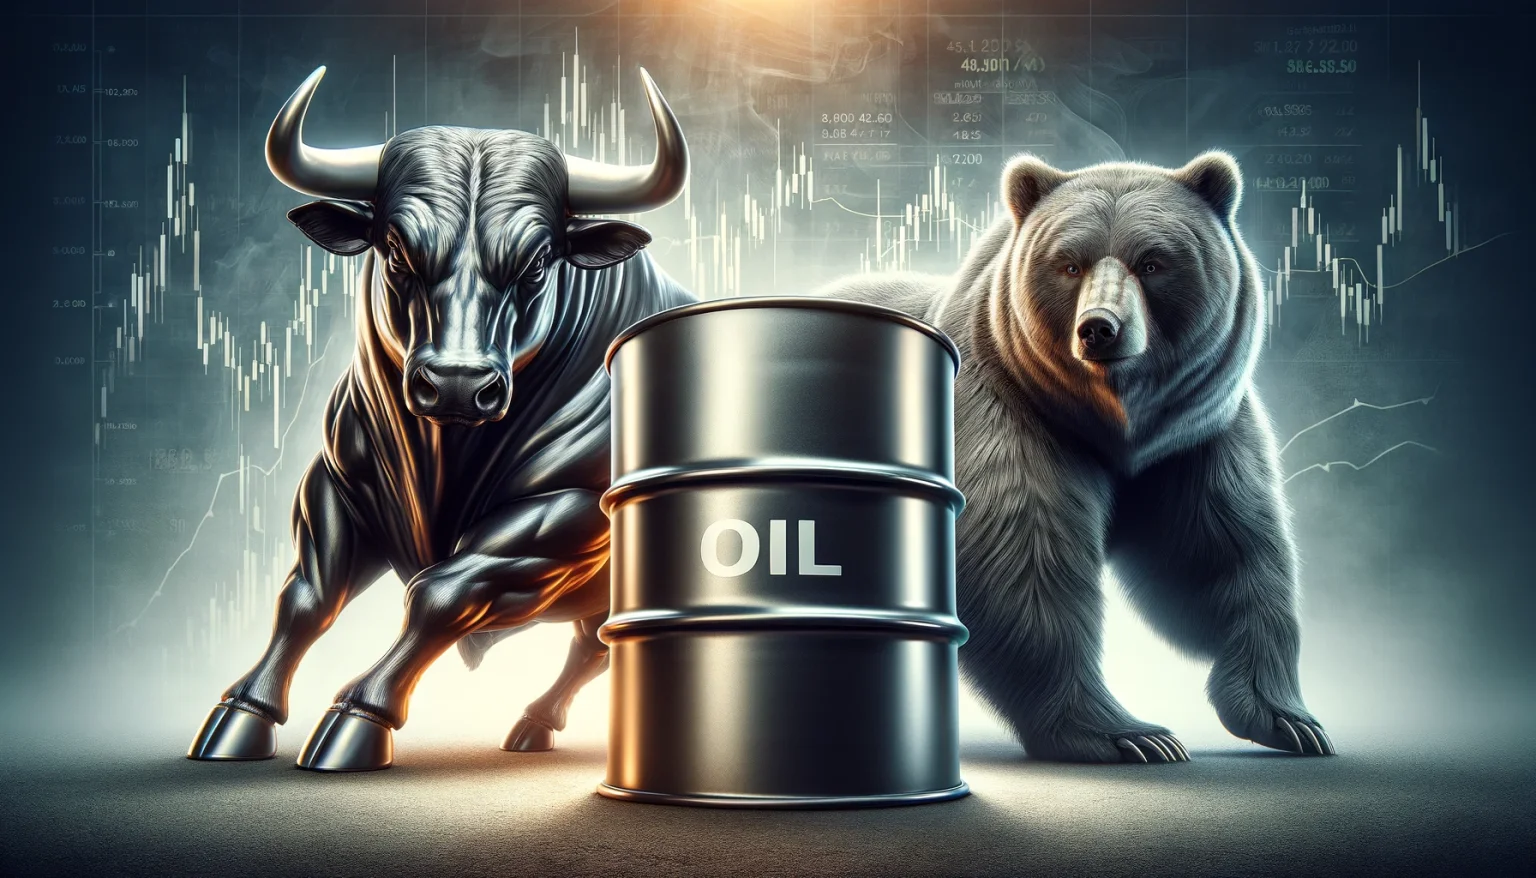 The Bulls and Bears Of Oil Demand